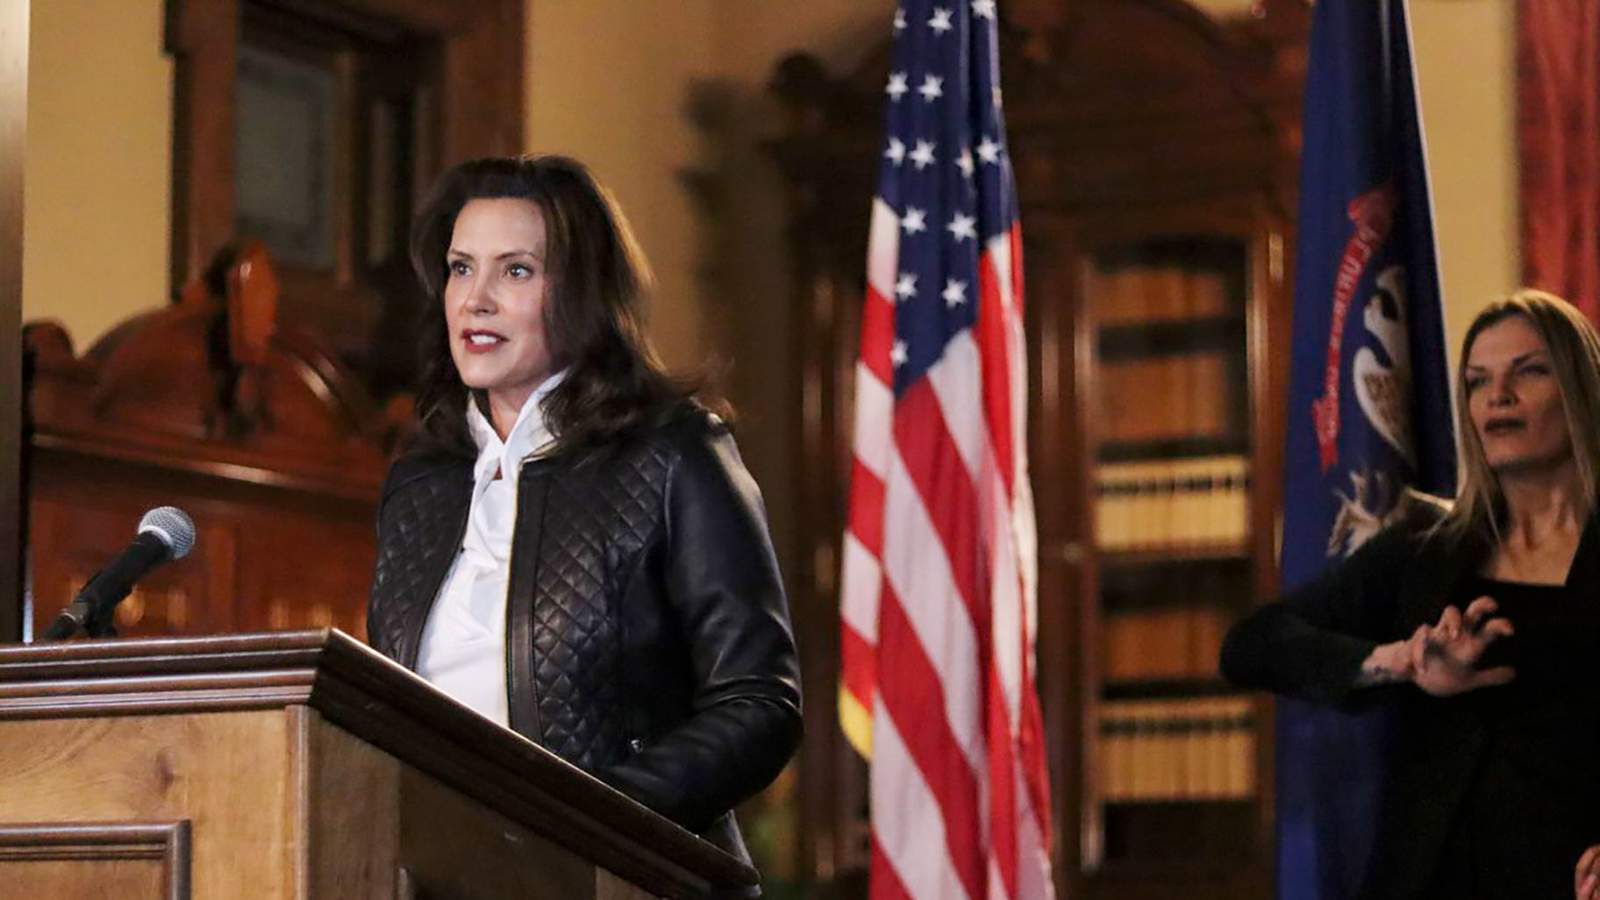 Live stream: Michigan Gov. Whitmer discusses voting in General Election